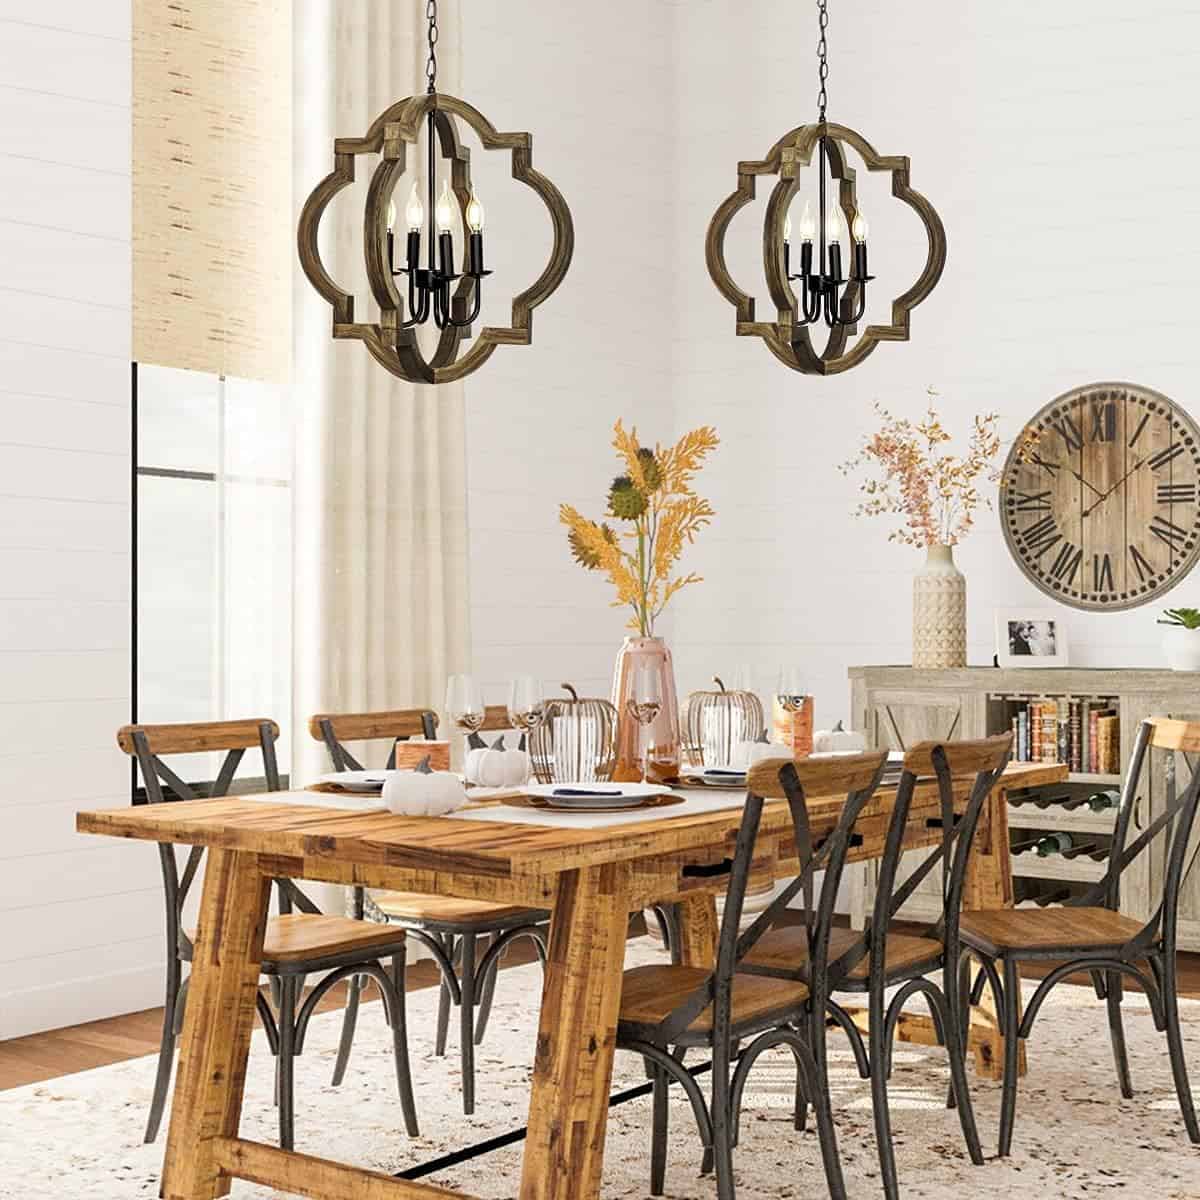 21.7 Farmhouse orb Chandelier 4-Light Adjustable Height Handmade Rustic Wood Light Fixture for Foyer Dining&Living Room Kitchen Island Entryway Breakfast AreaColour Black 5